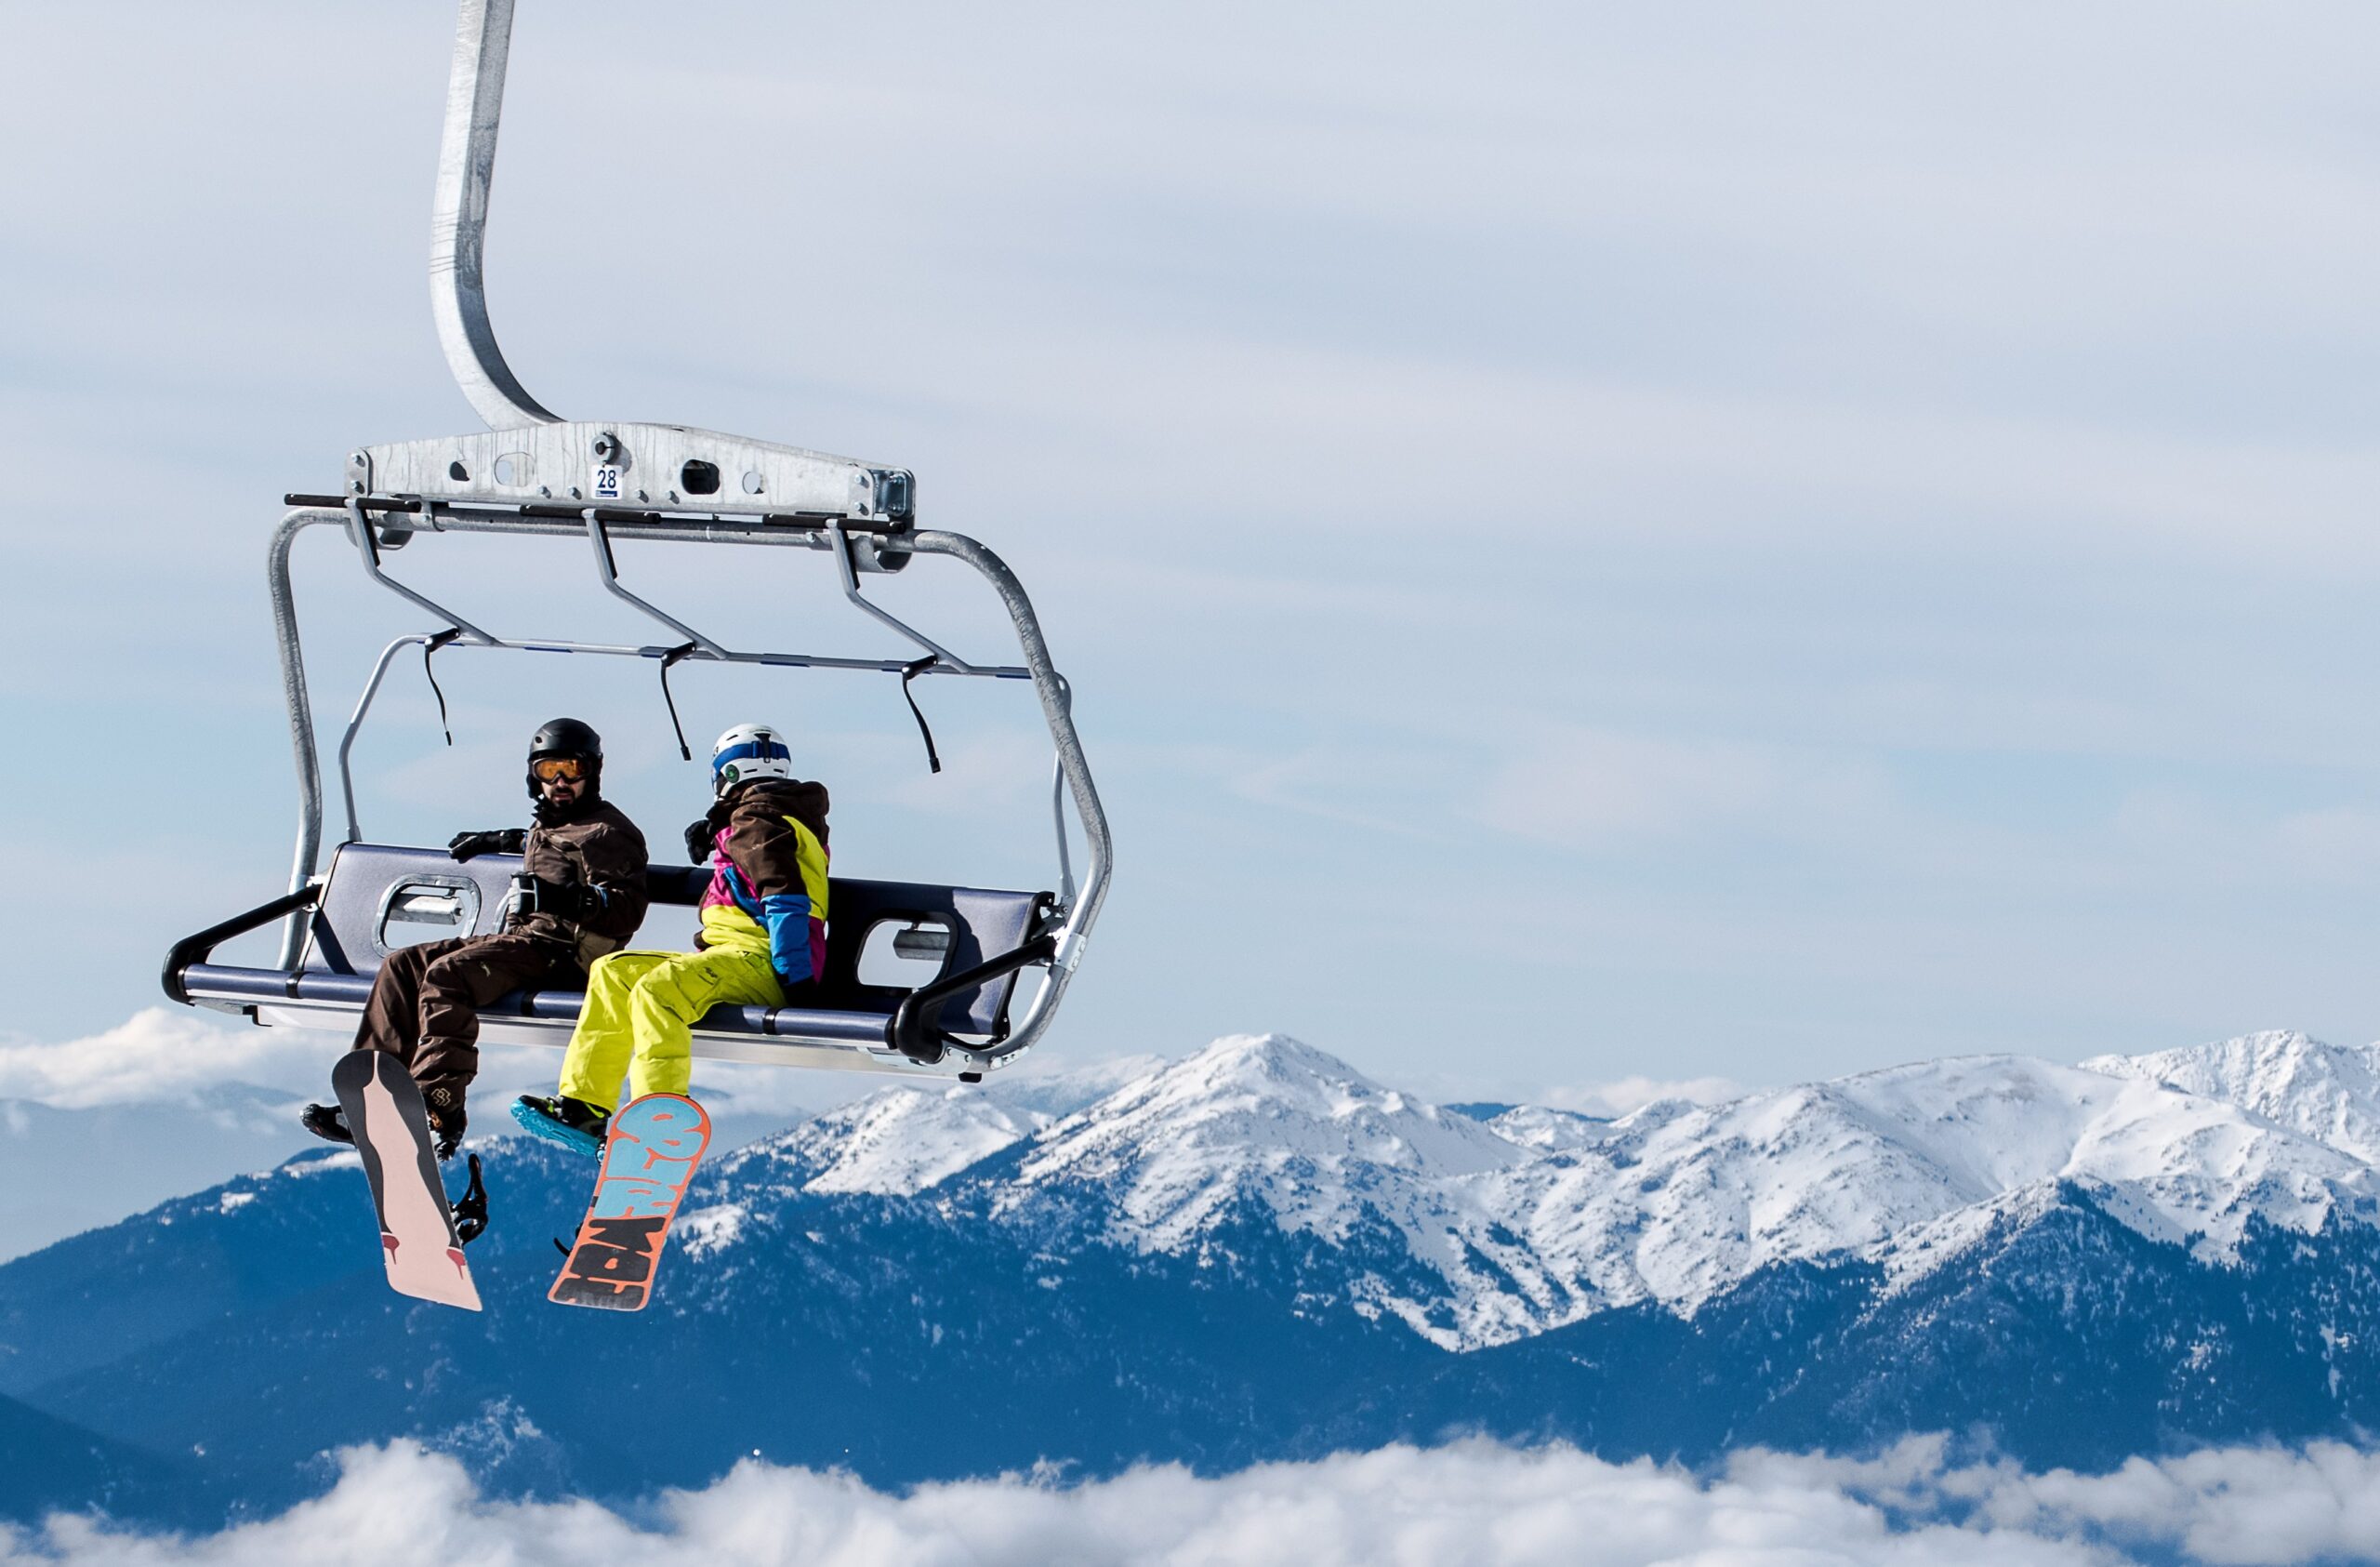 snowboarders on lift